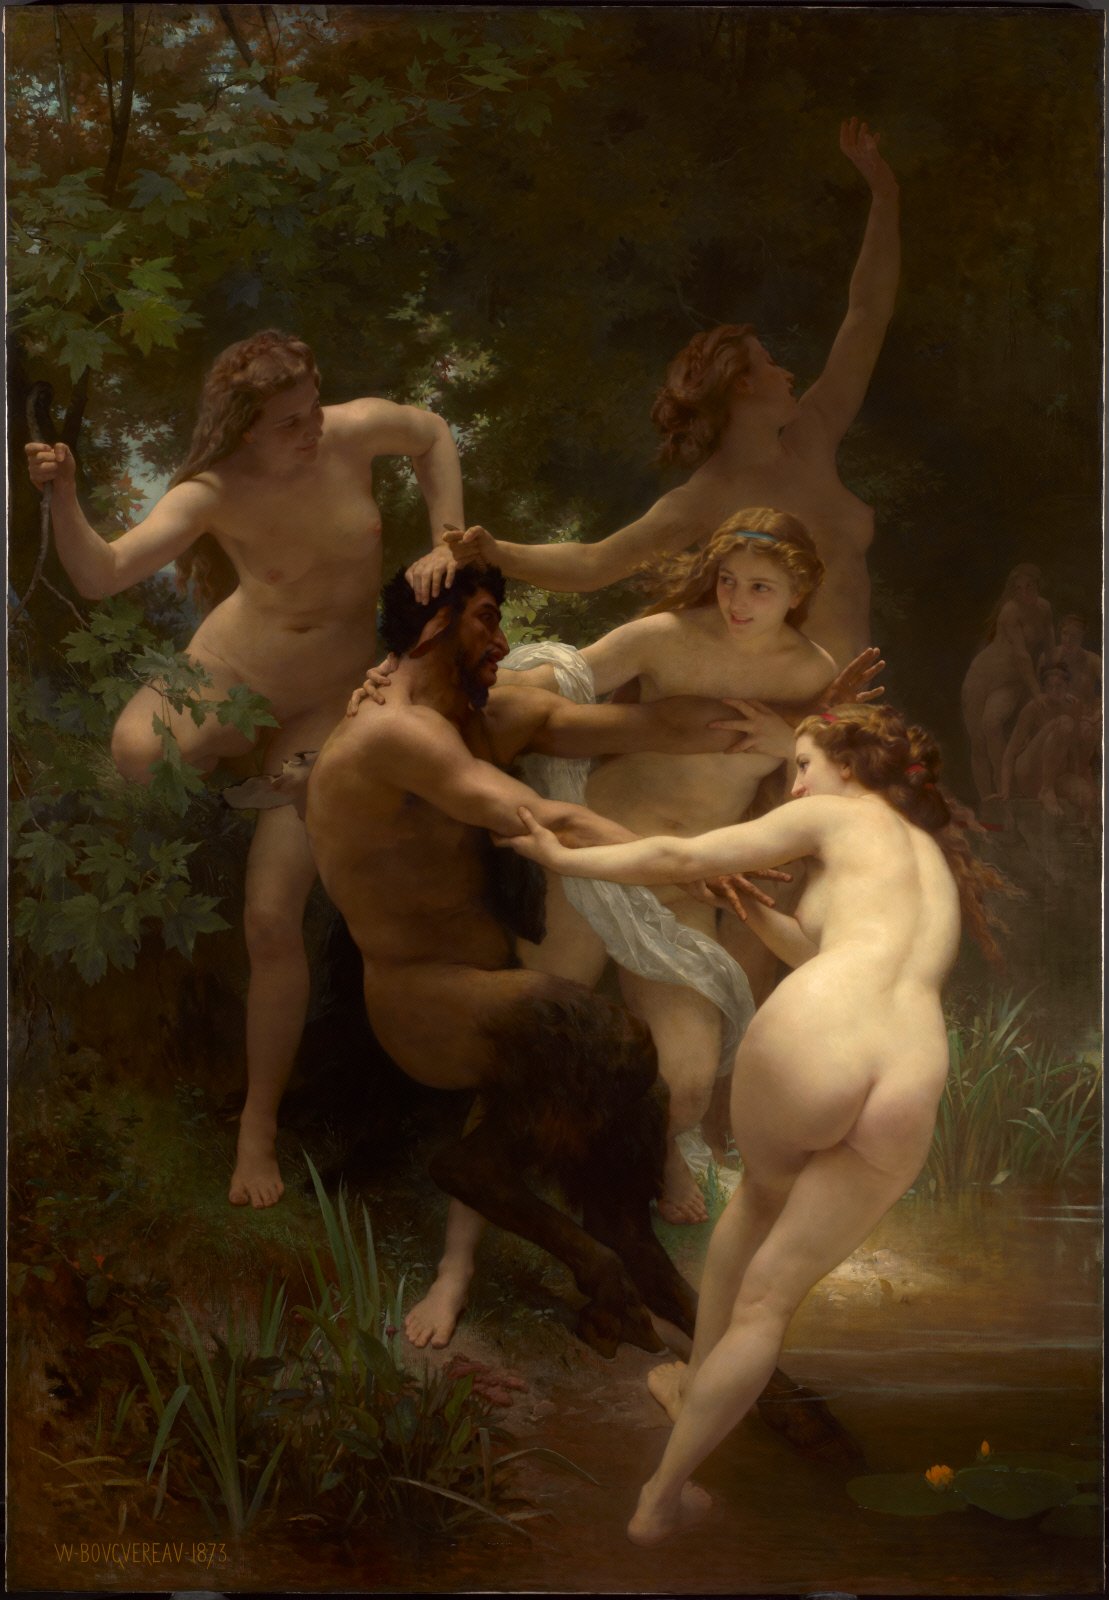 Peter Pan Porn Captions - Nymphs and Satyr